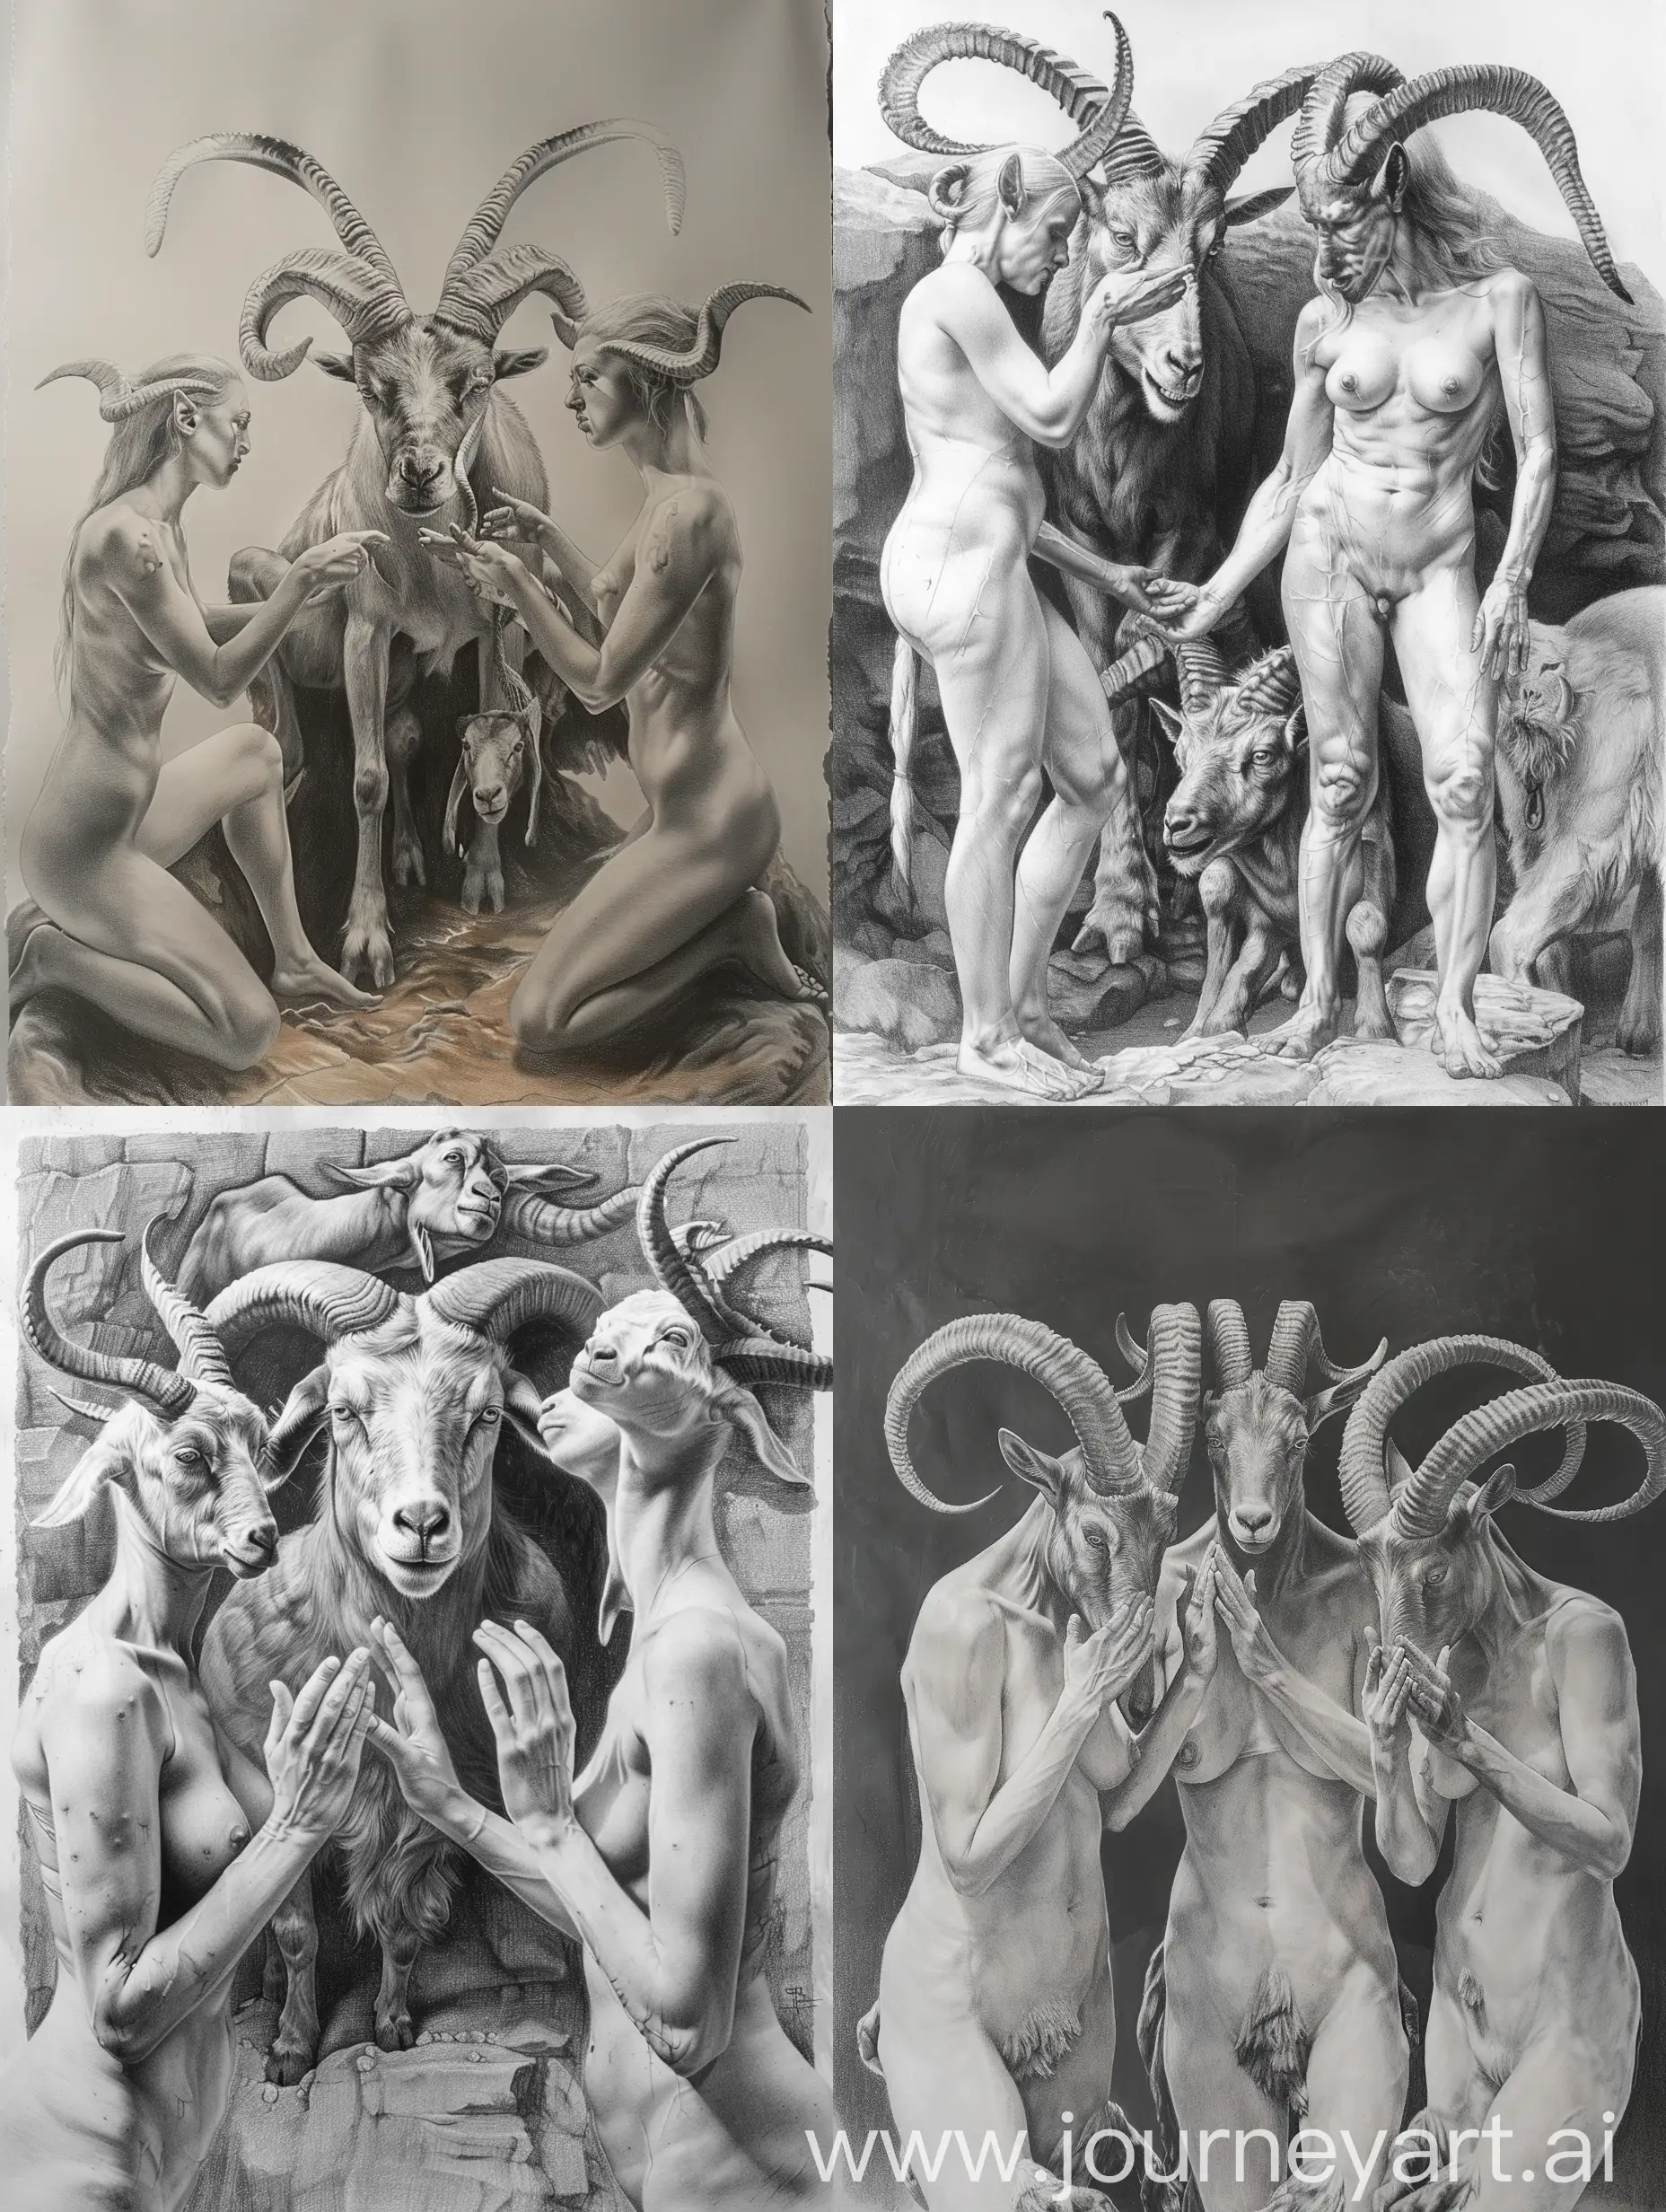 creative dark hyper realistic pencil sketch of three mythological figures, each showing reverence towards the central goat-headed figure in a surreal setting on a large canvas in great details